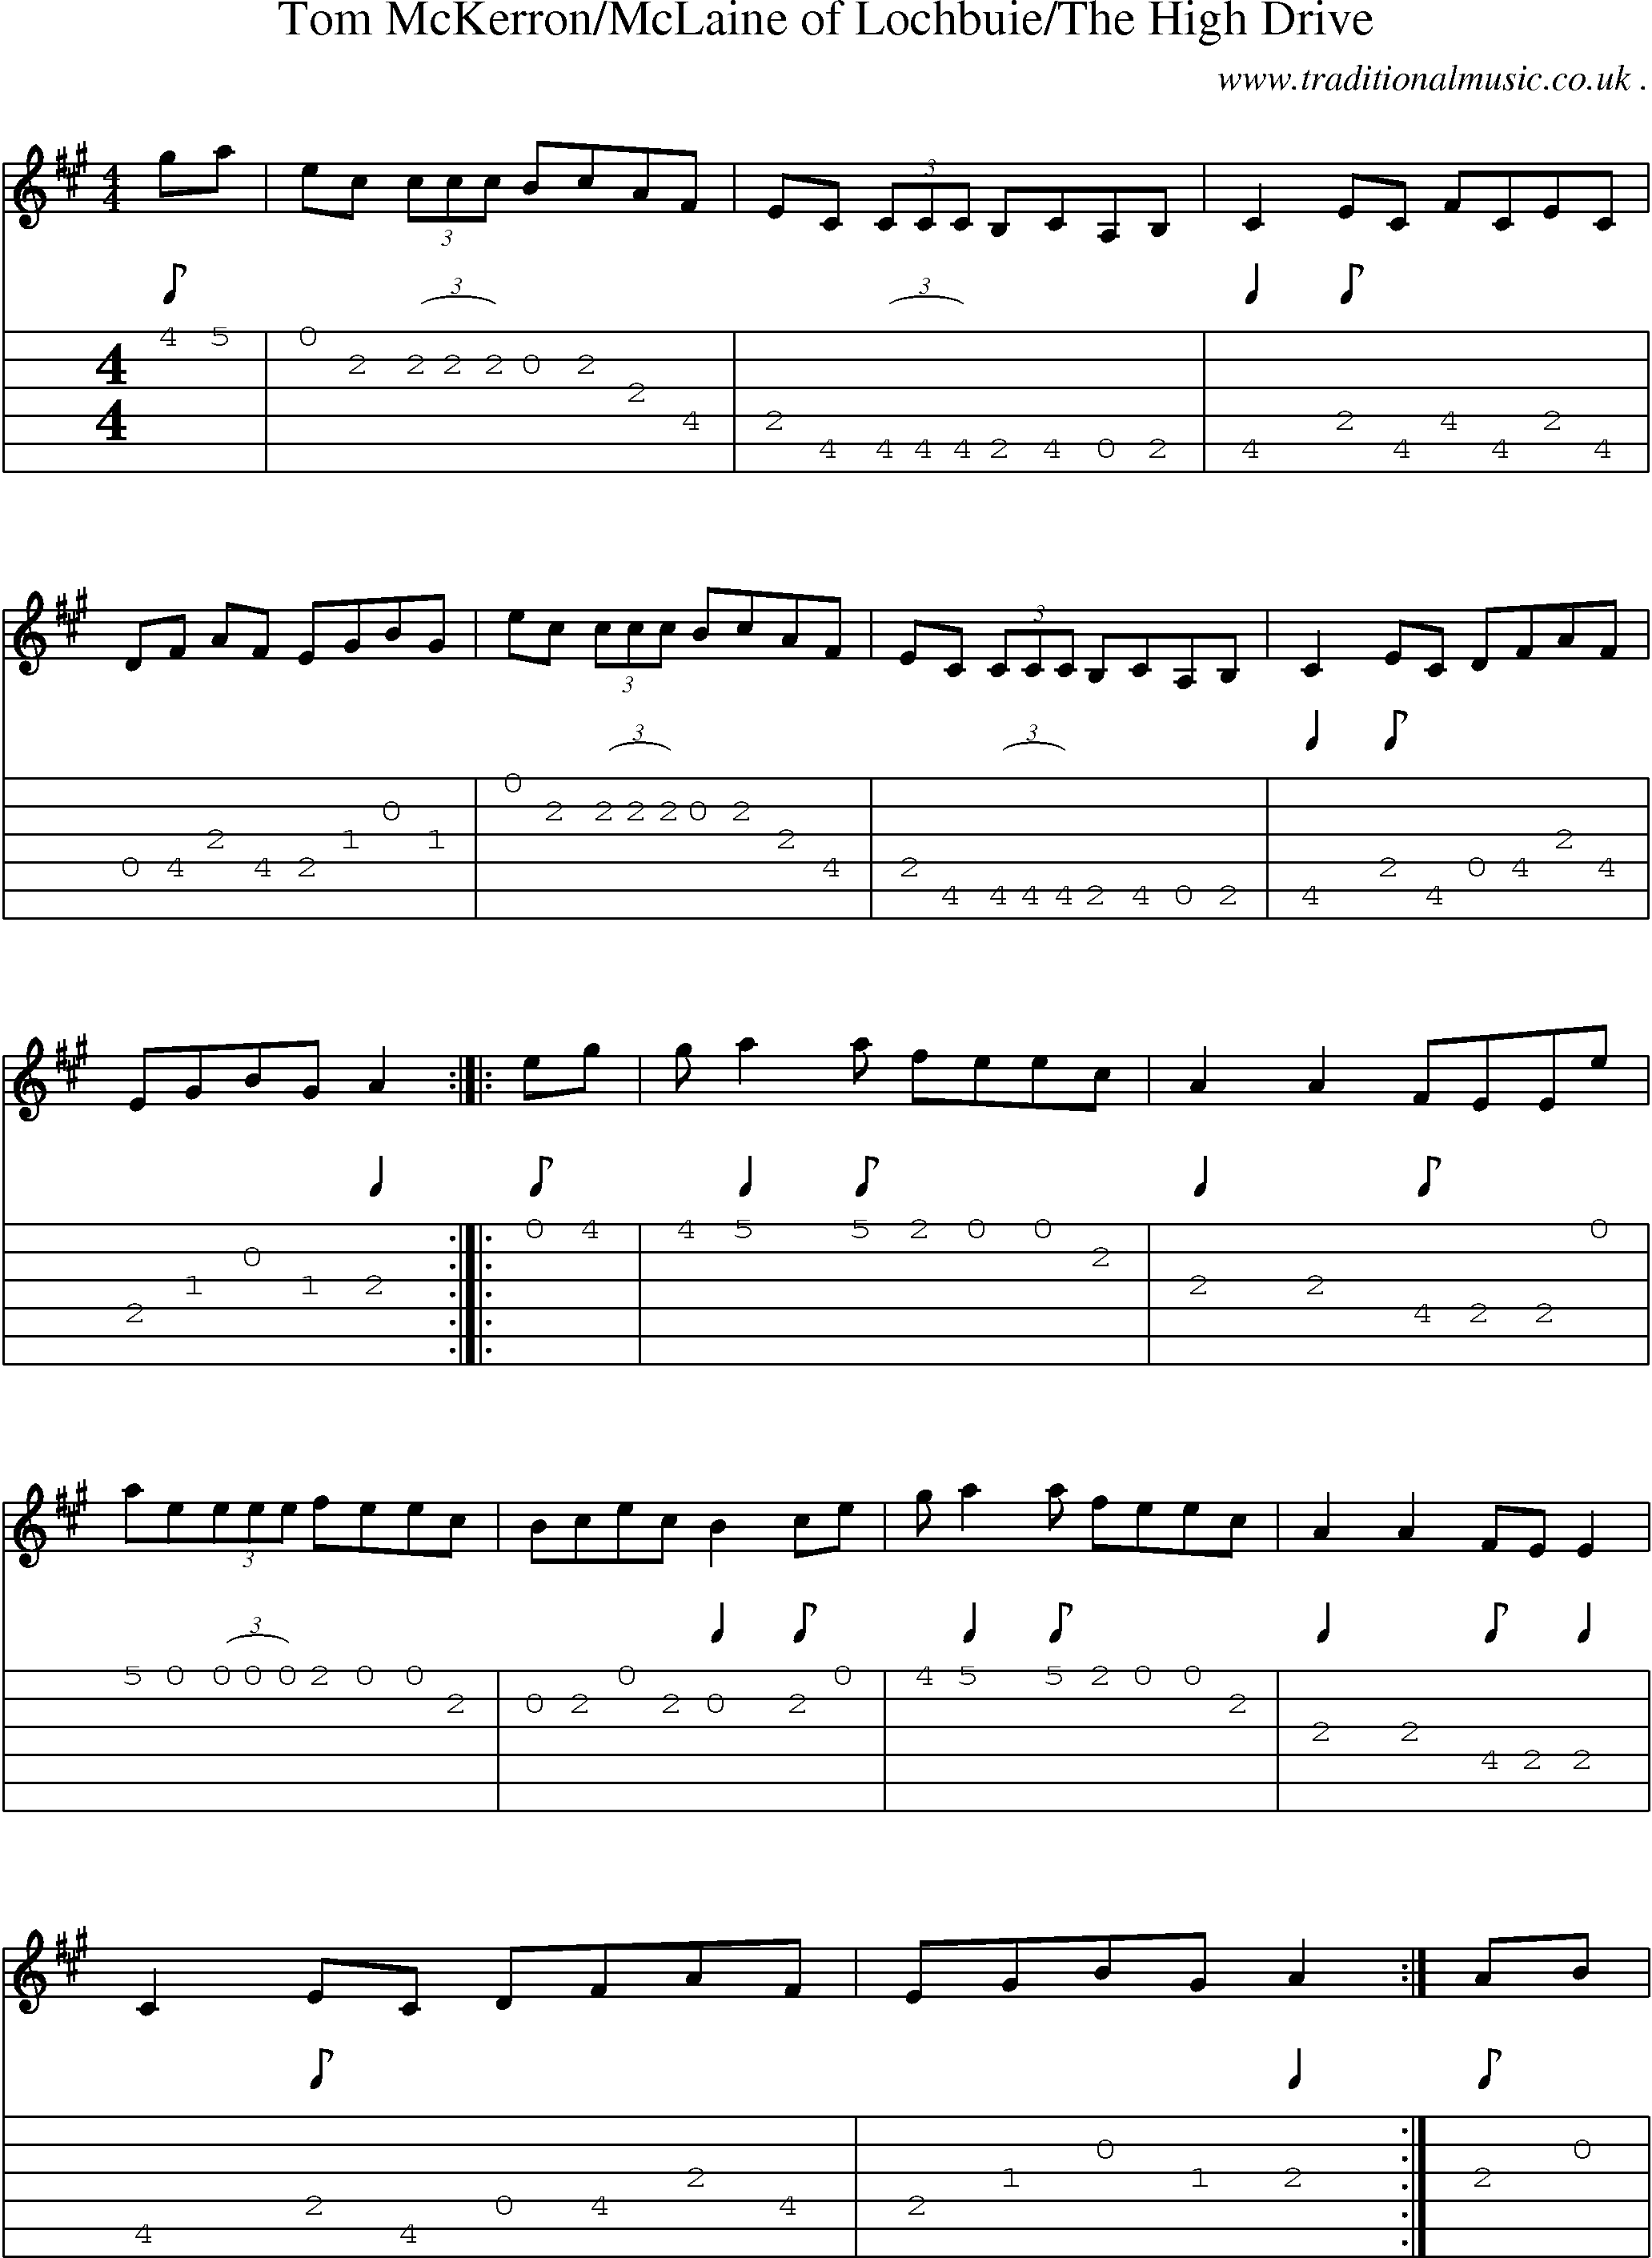 Sheet-music  score, Chords and Guitar Tabs for Tom Mckerronmclaine Of Lochbuiethe High Drive